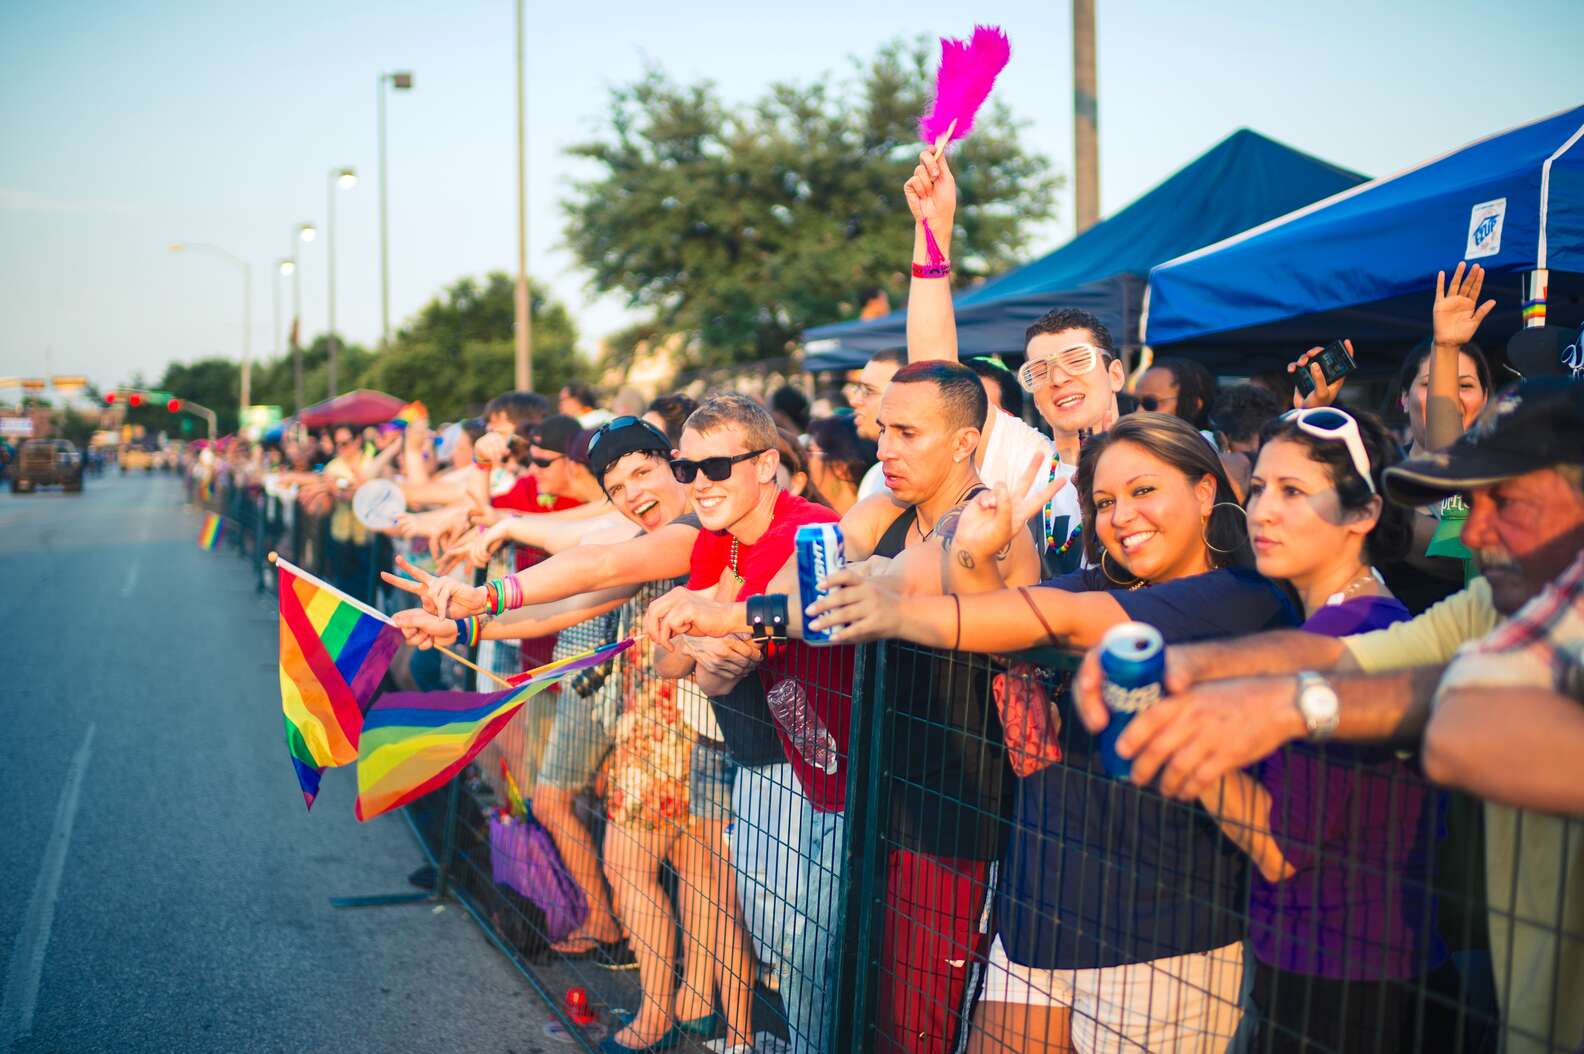 Houston Gay Pride Parade 2019 Route, Start Time, Road Closures & More